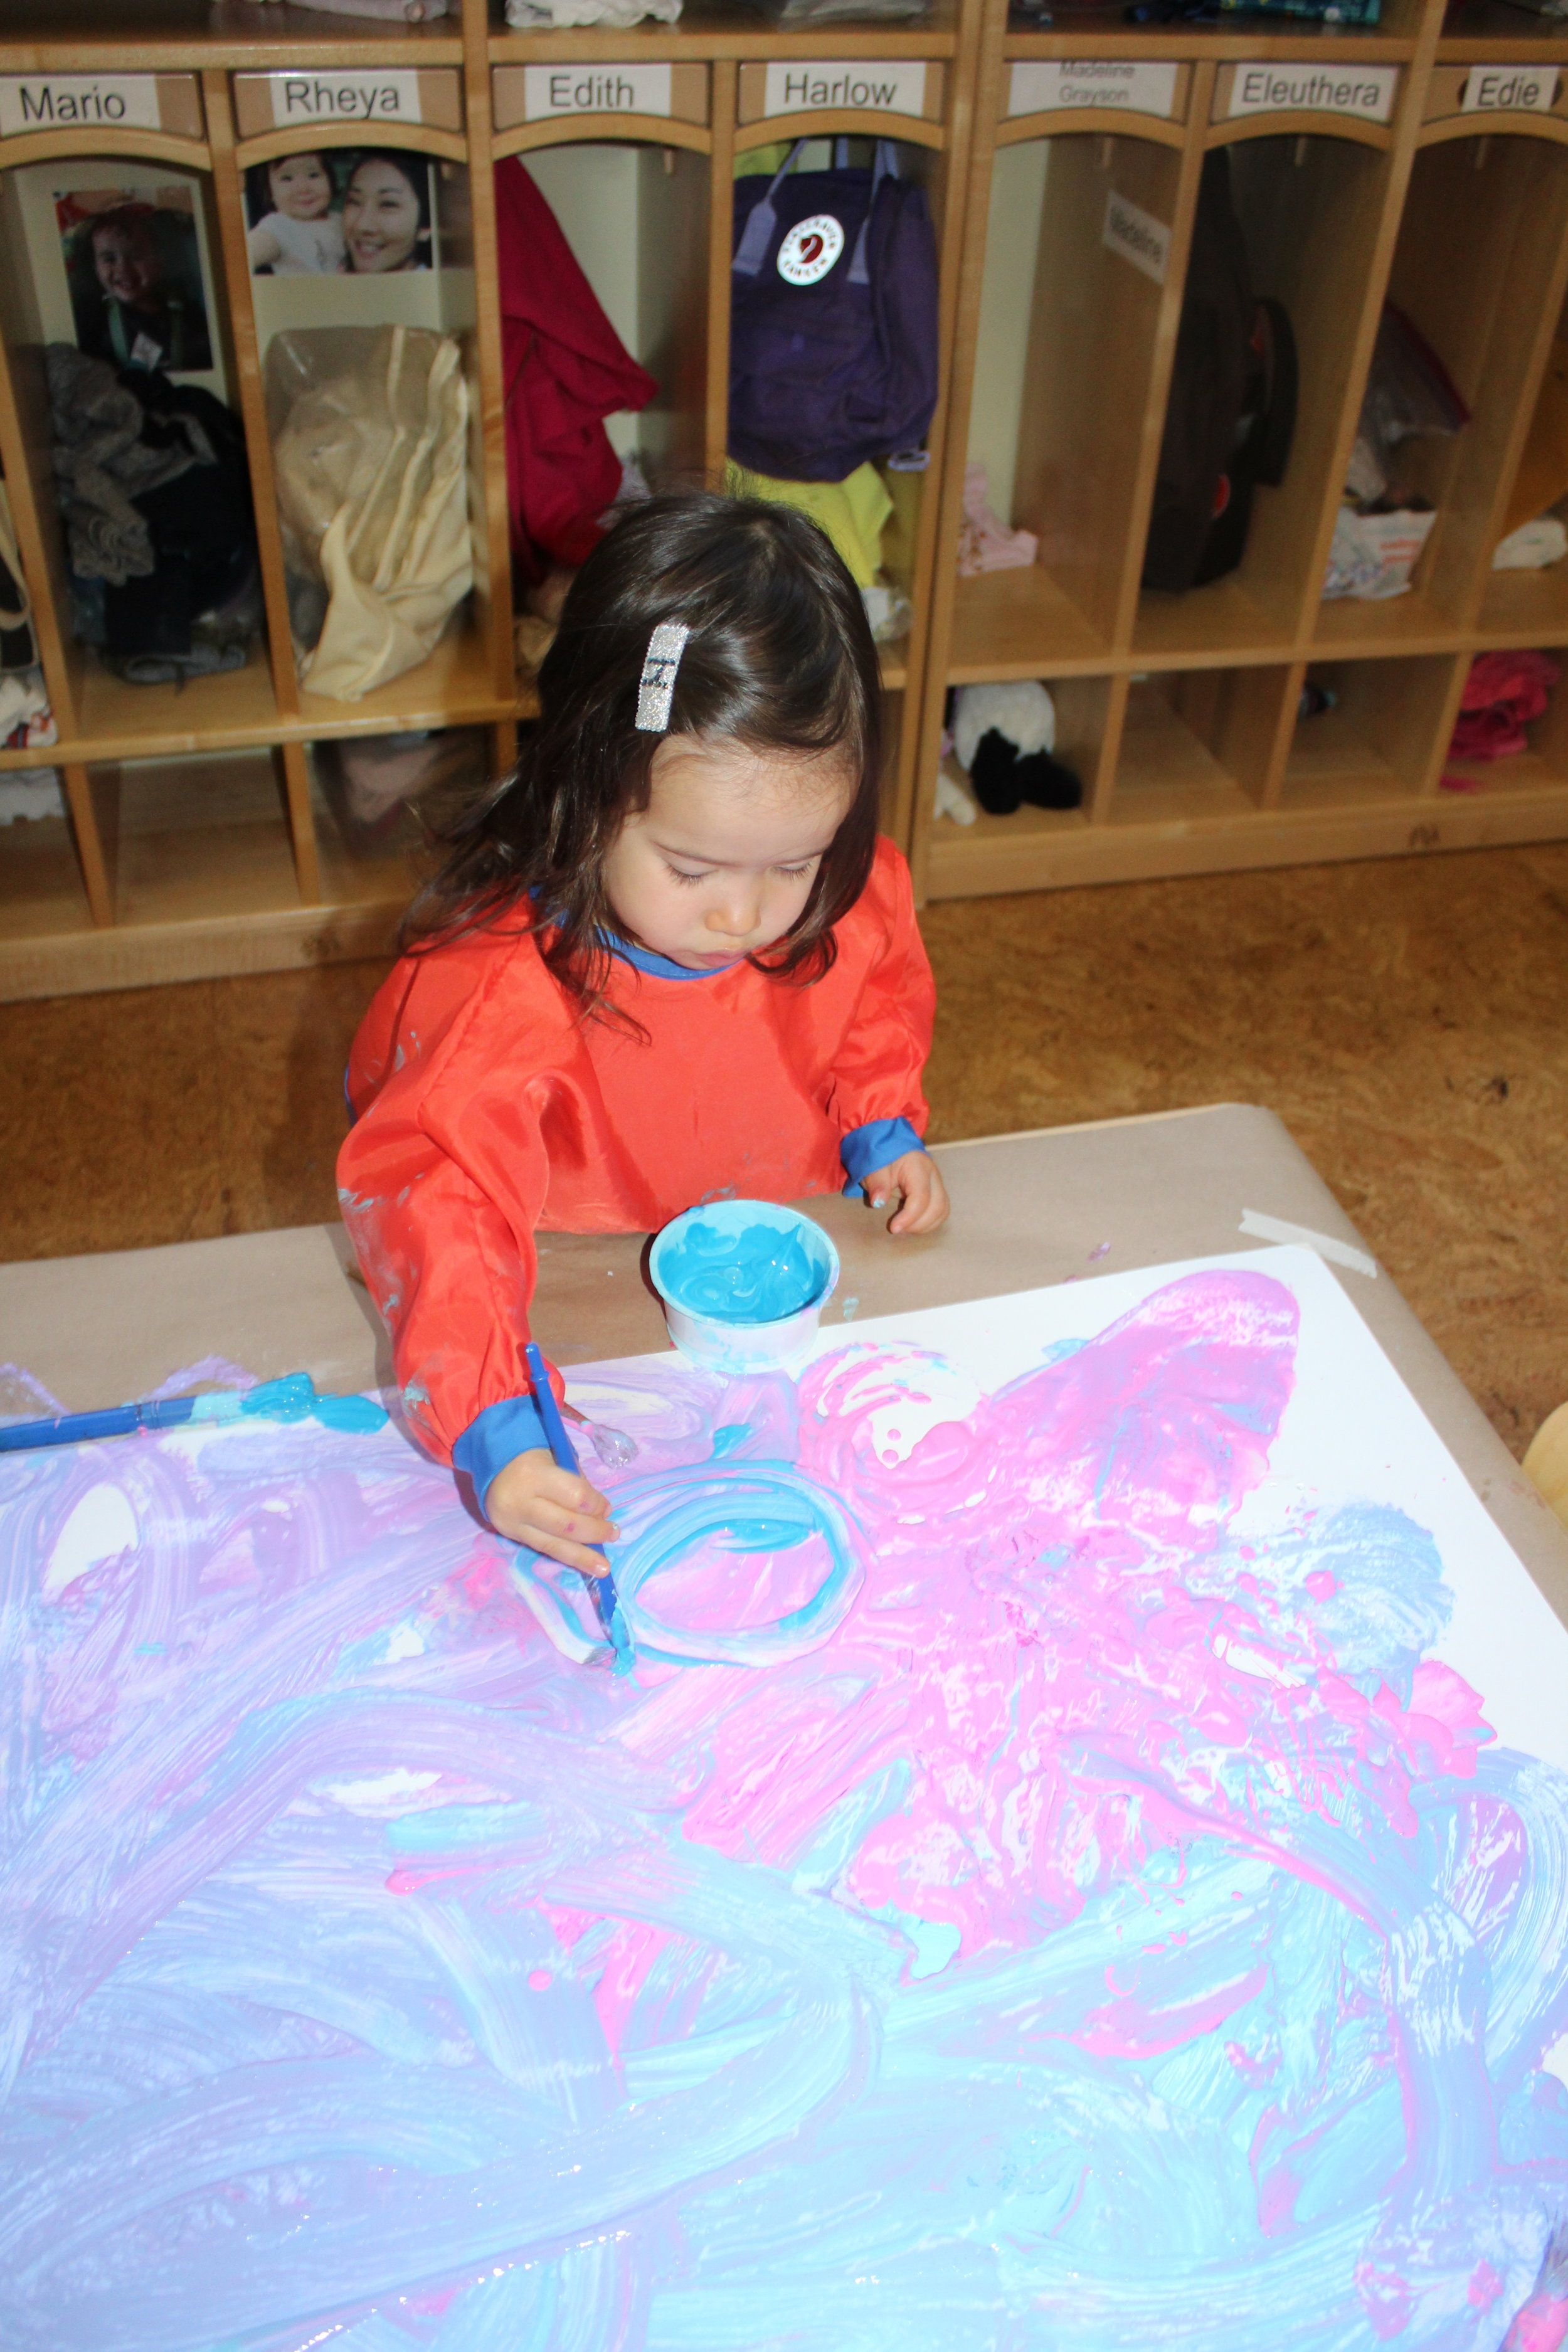  Painting provides texture and color exploration. It enables children to create and become curious as they paint. Combining colors and using a paintbrush or their hands to explore are elements that help them create and discover. As Ellie was mixing t